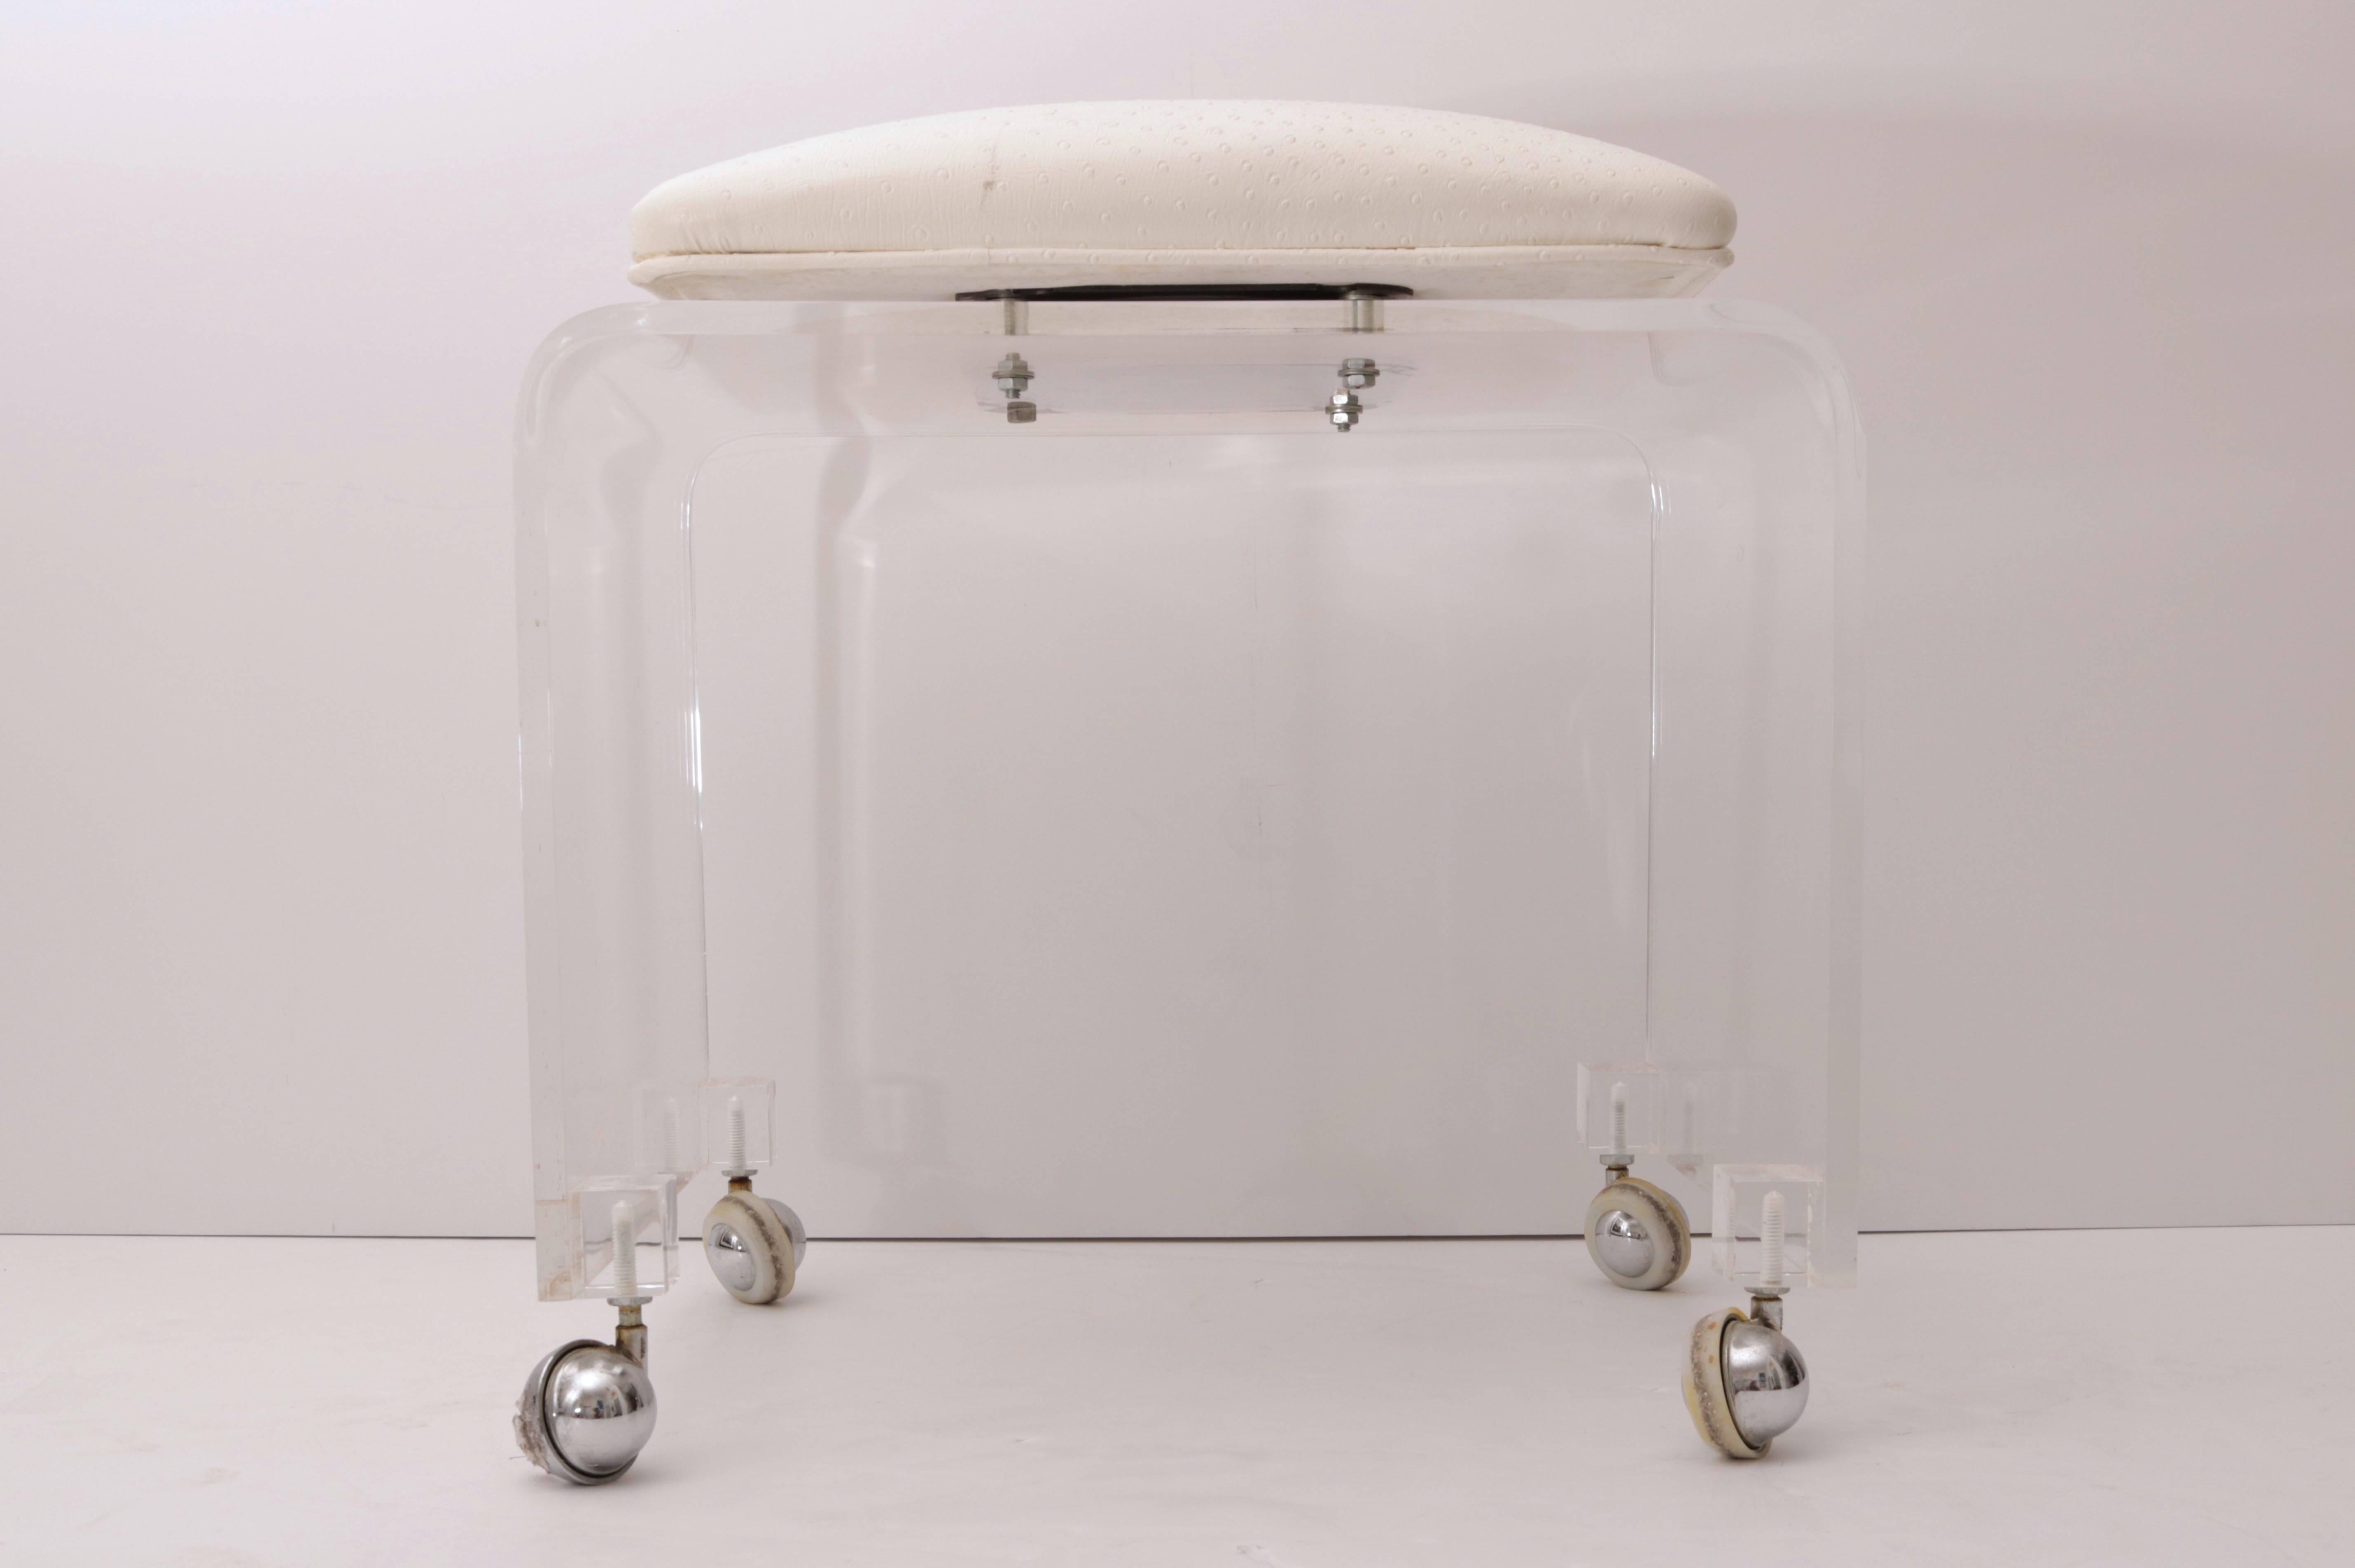 20th Century Lucite Vanity Stool, Swivel Seat Upholstered in Ostrich Pattern Fabric